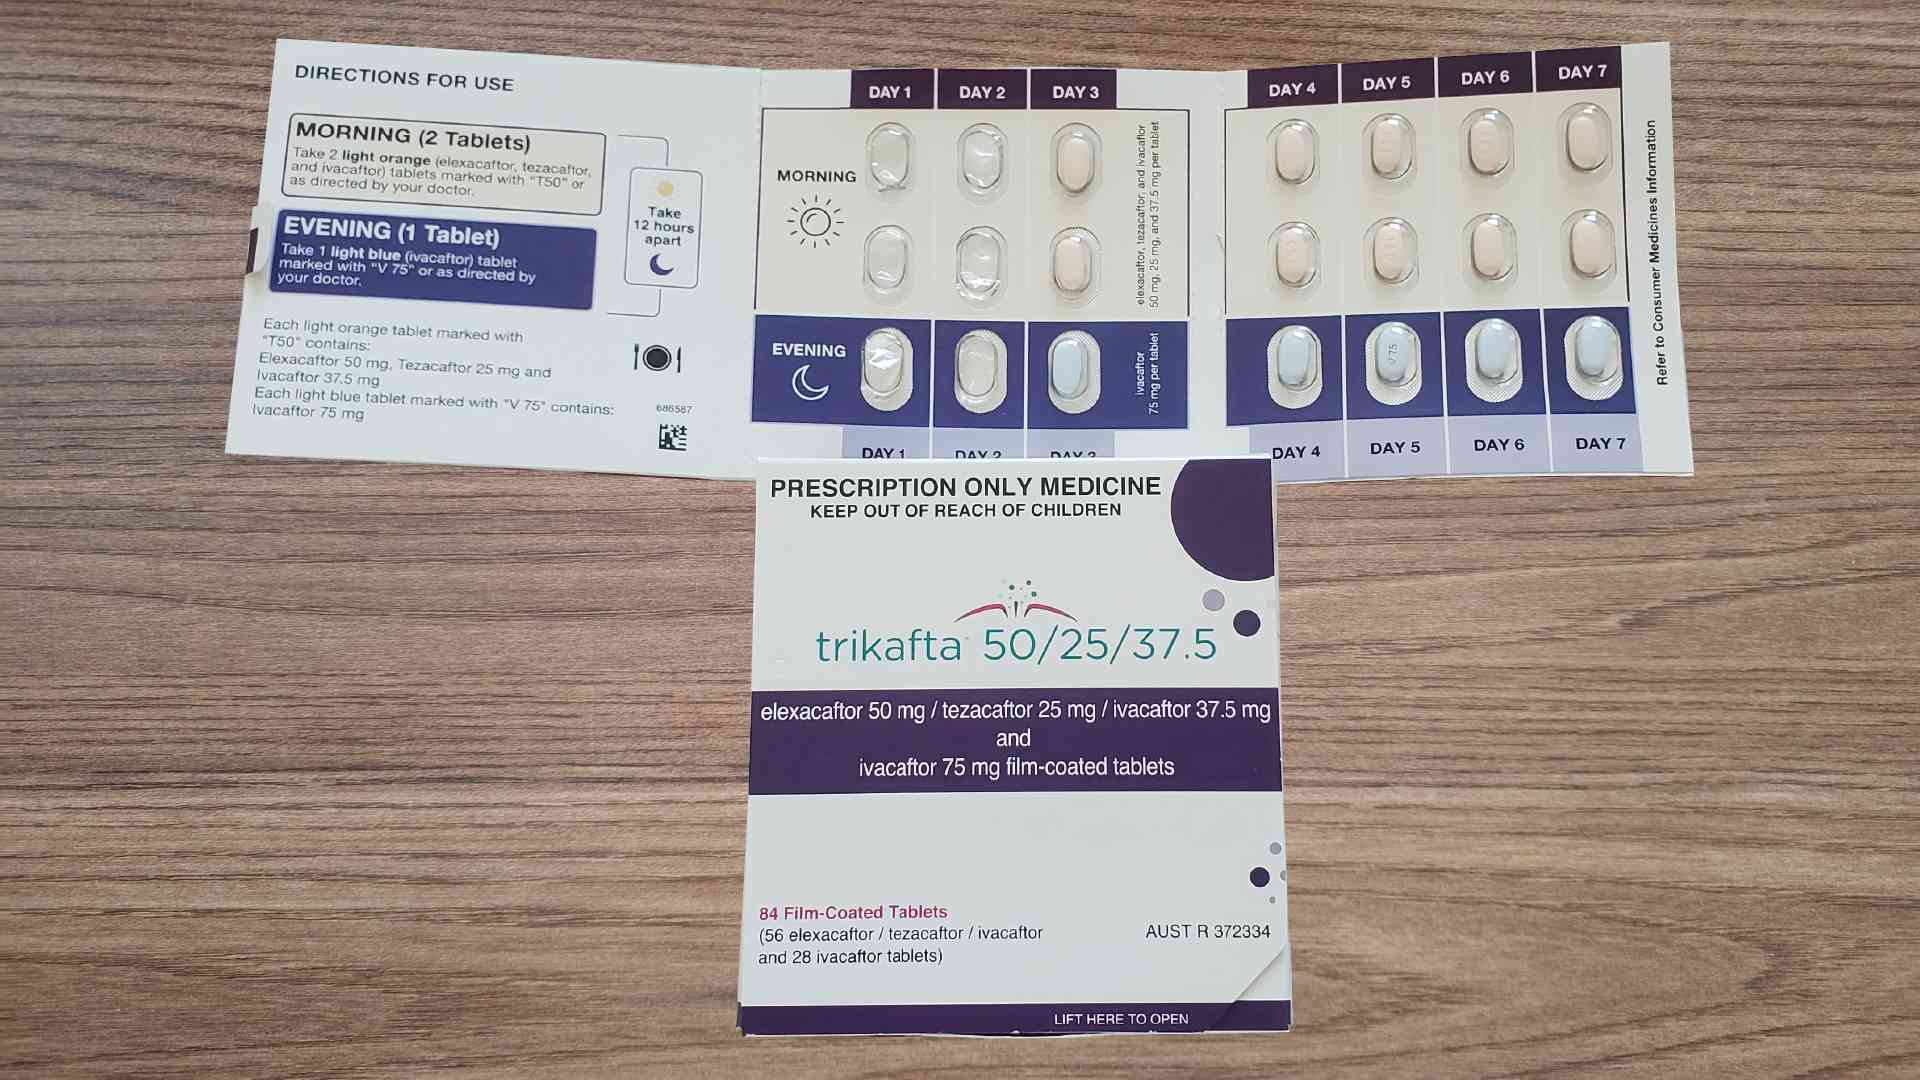 An image of Trikafta's packaging against a wooden background